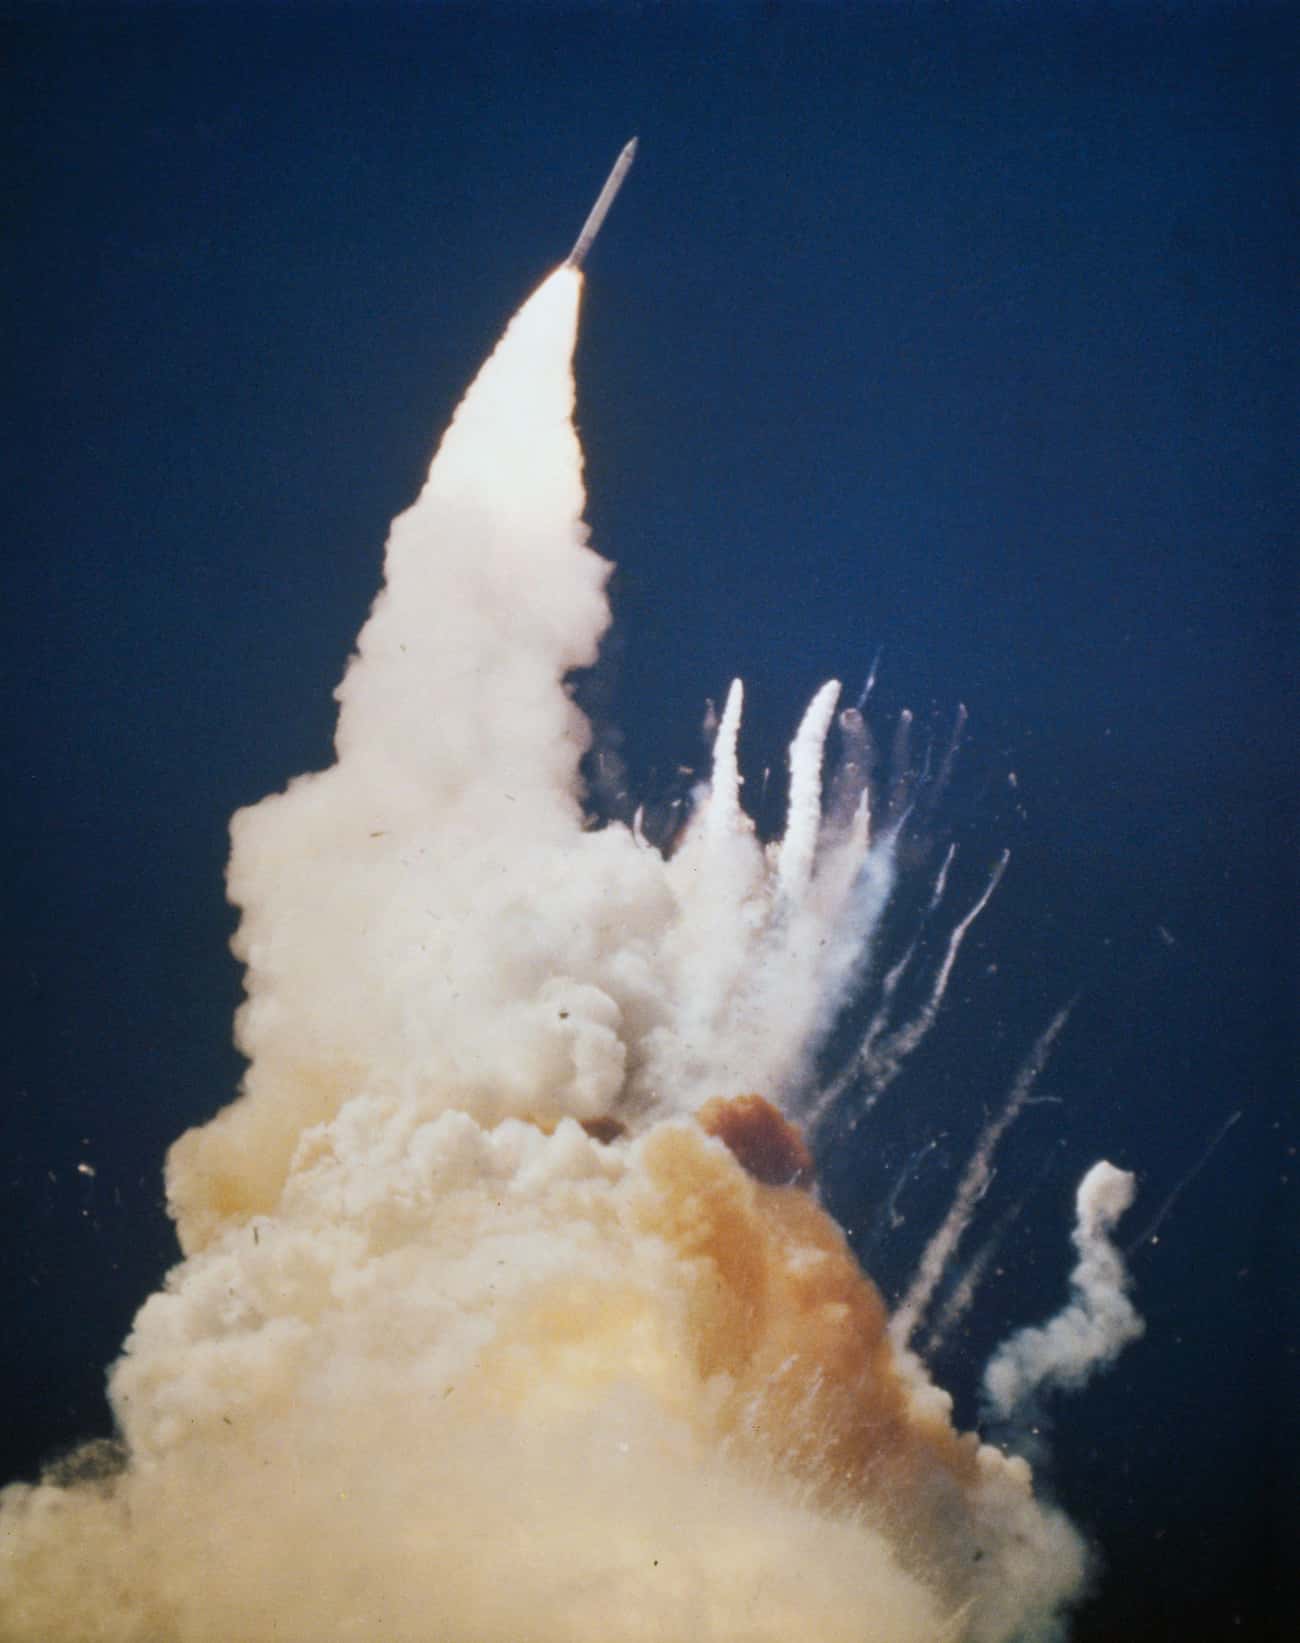 The Cabin Of The Challenger Actually Escaped The Explosion Mostly Intact